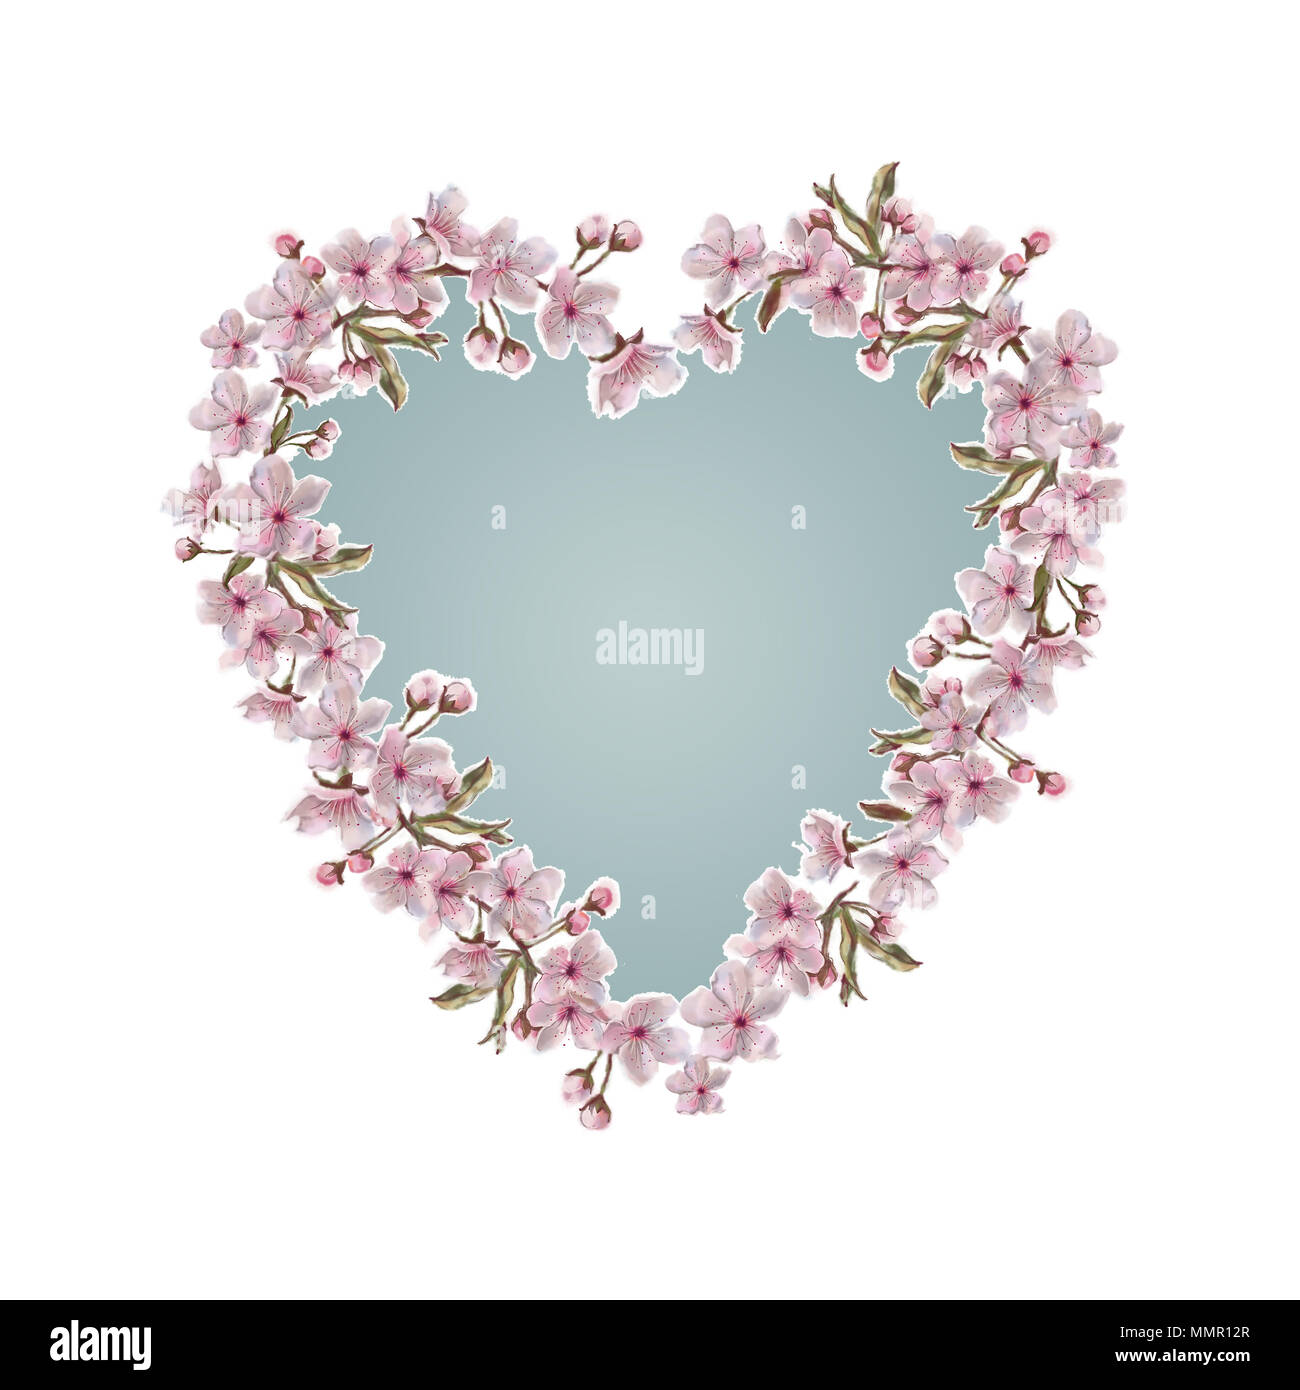 Spring Floral Wreaths Frame with Blue Core Background. Romantic Template  for Valentine Day, Wedding, and Special Event. Floral Heart Shaped Wreath  Stock Photo - Alamy